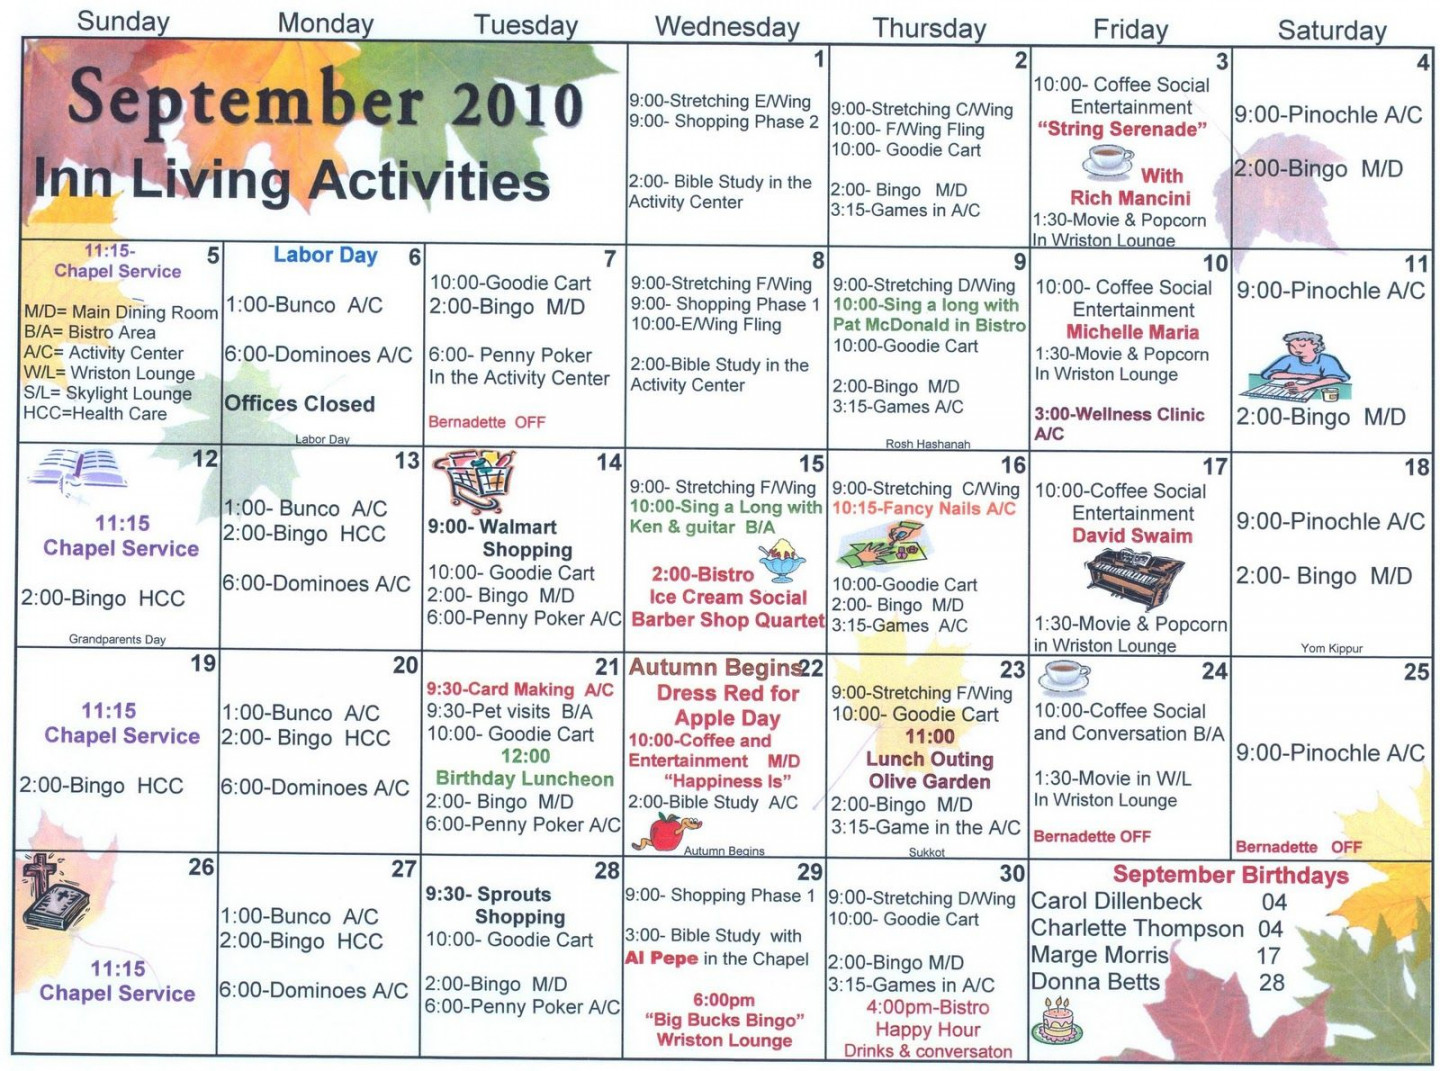 Independent and Assisted Living Activity Calendar Click on